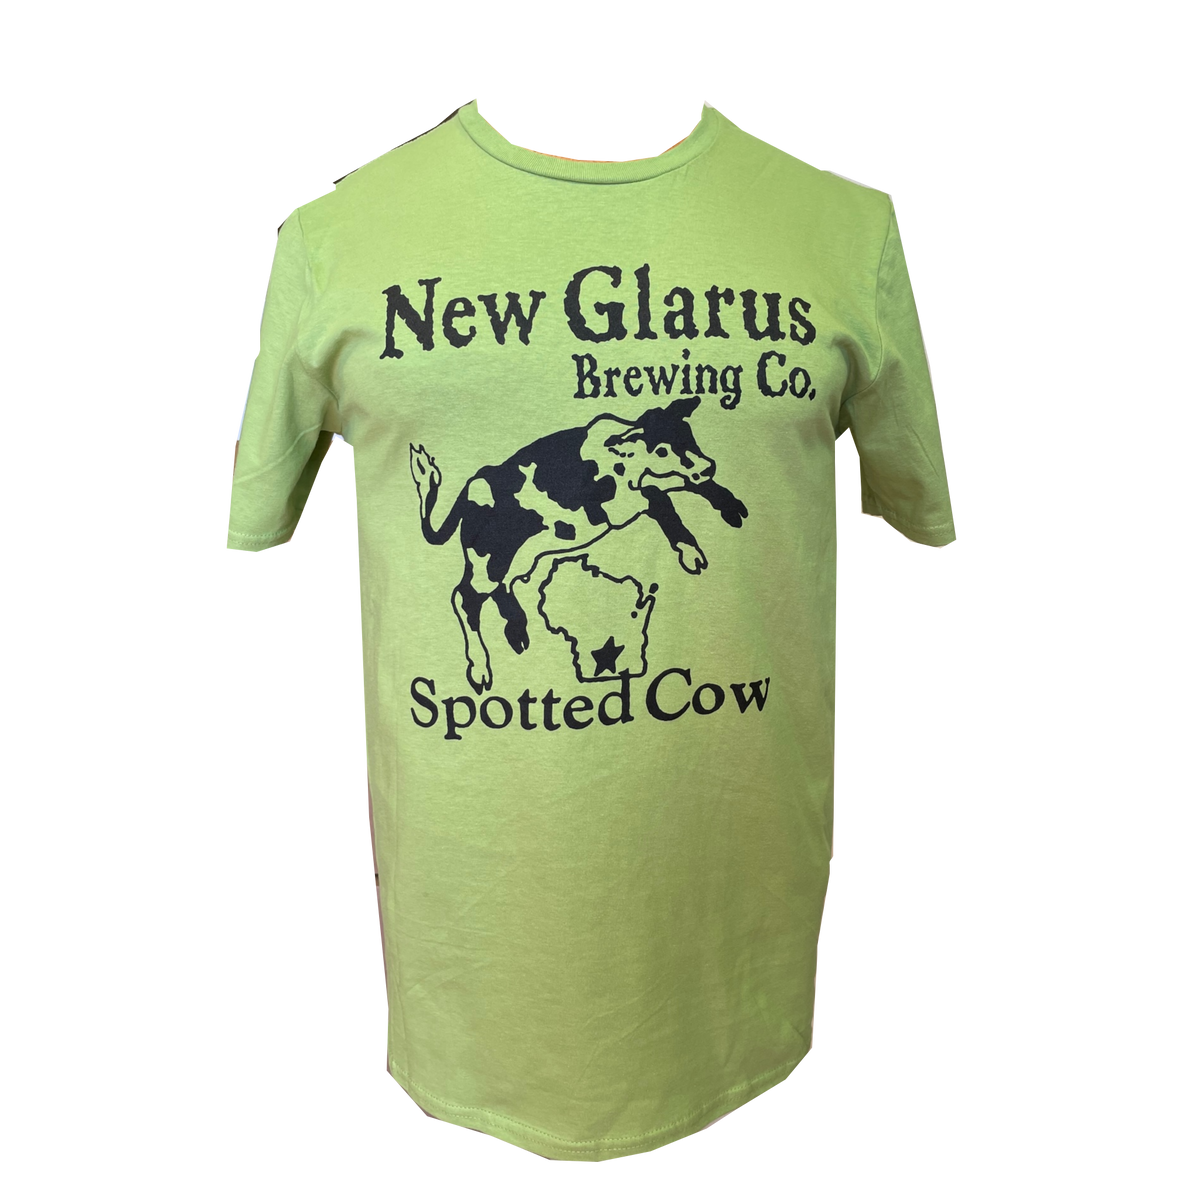 Kiwi green t-shirt with the New Glarus Brewing Co. Spotted Cow logo on the front.